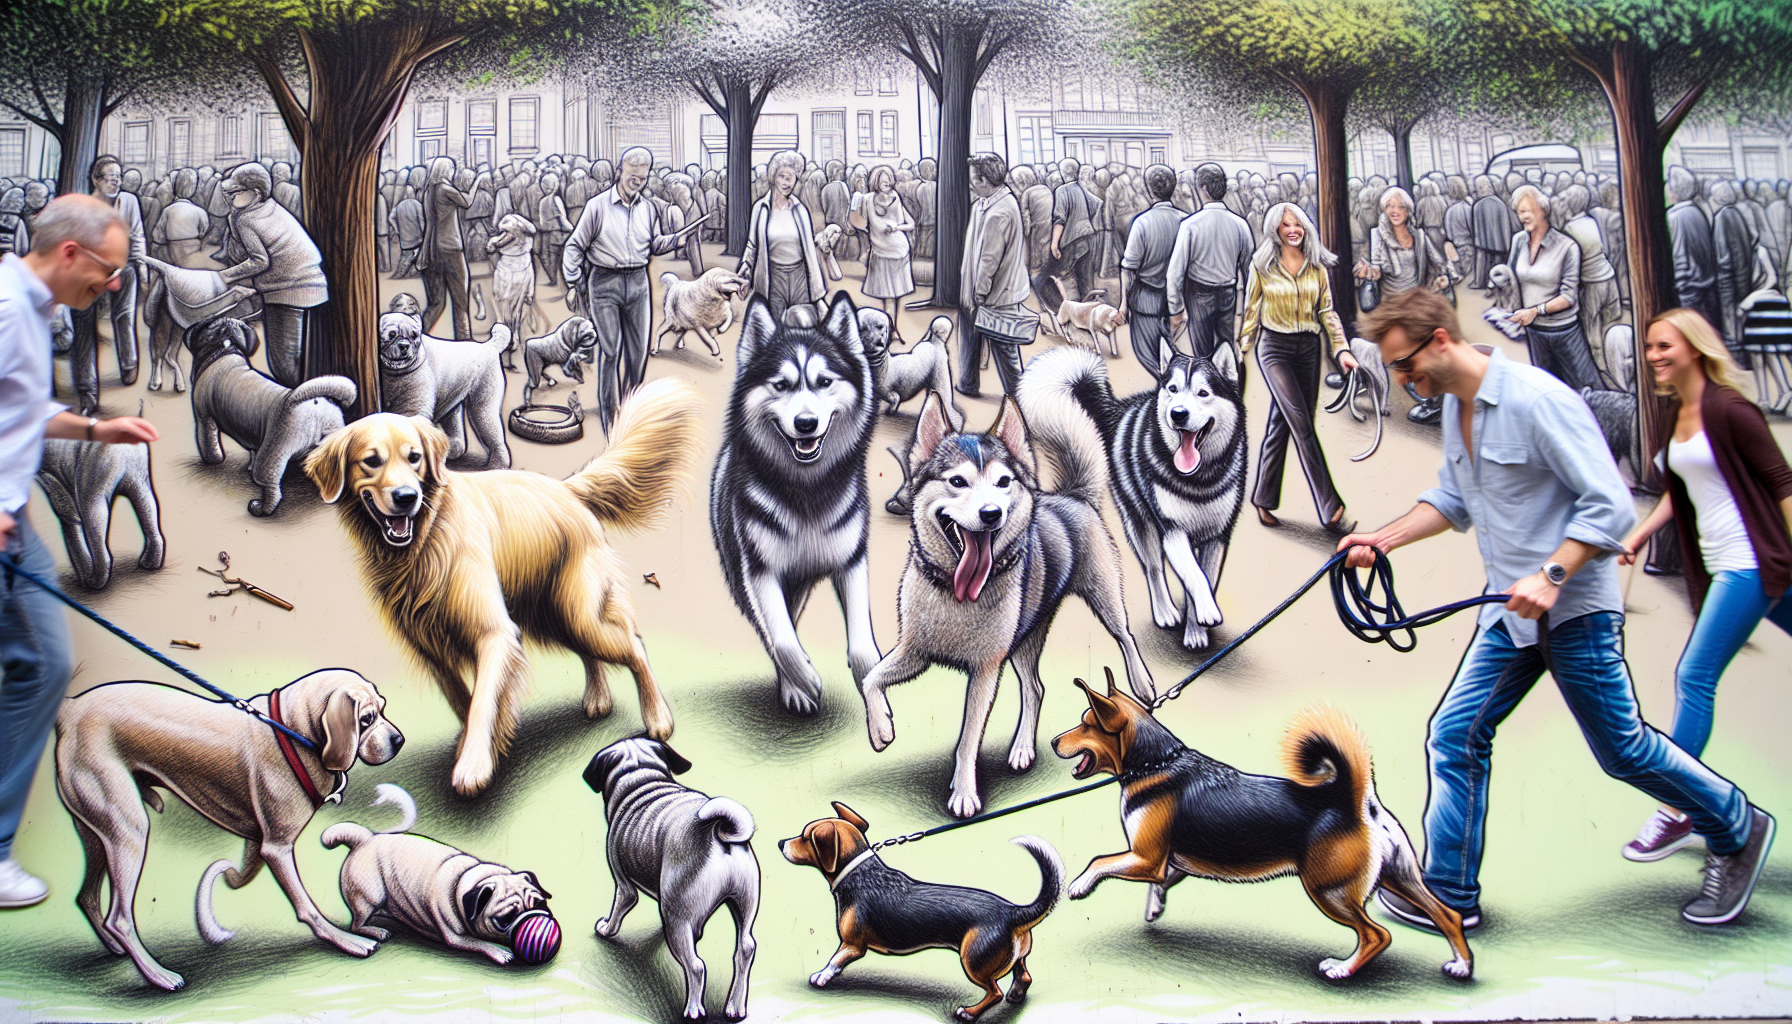 Drawing of dogs playing together in a social setting